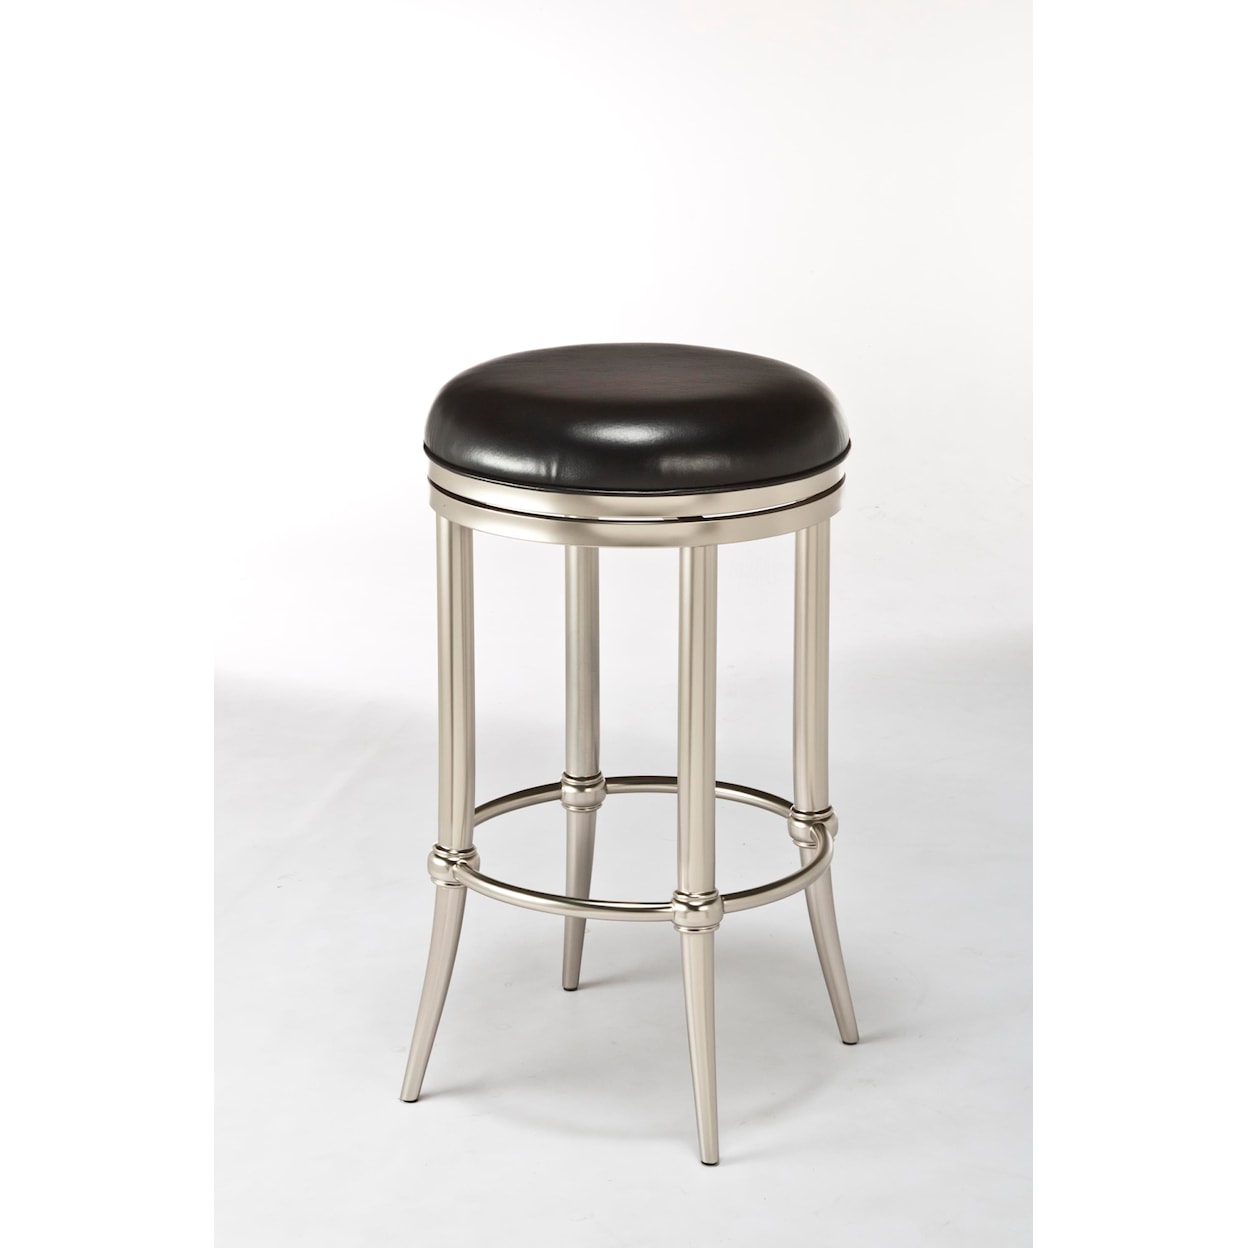 Hillsdale Backless Bar Stools Cadman Backless Counter Stool